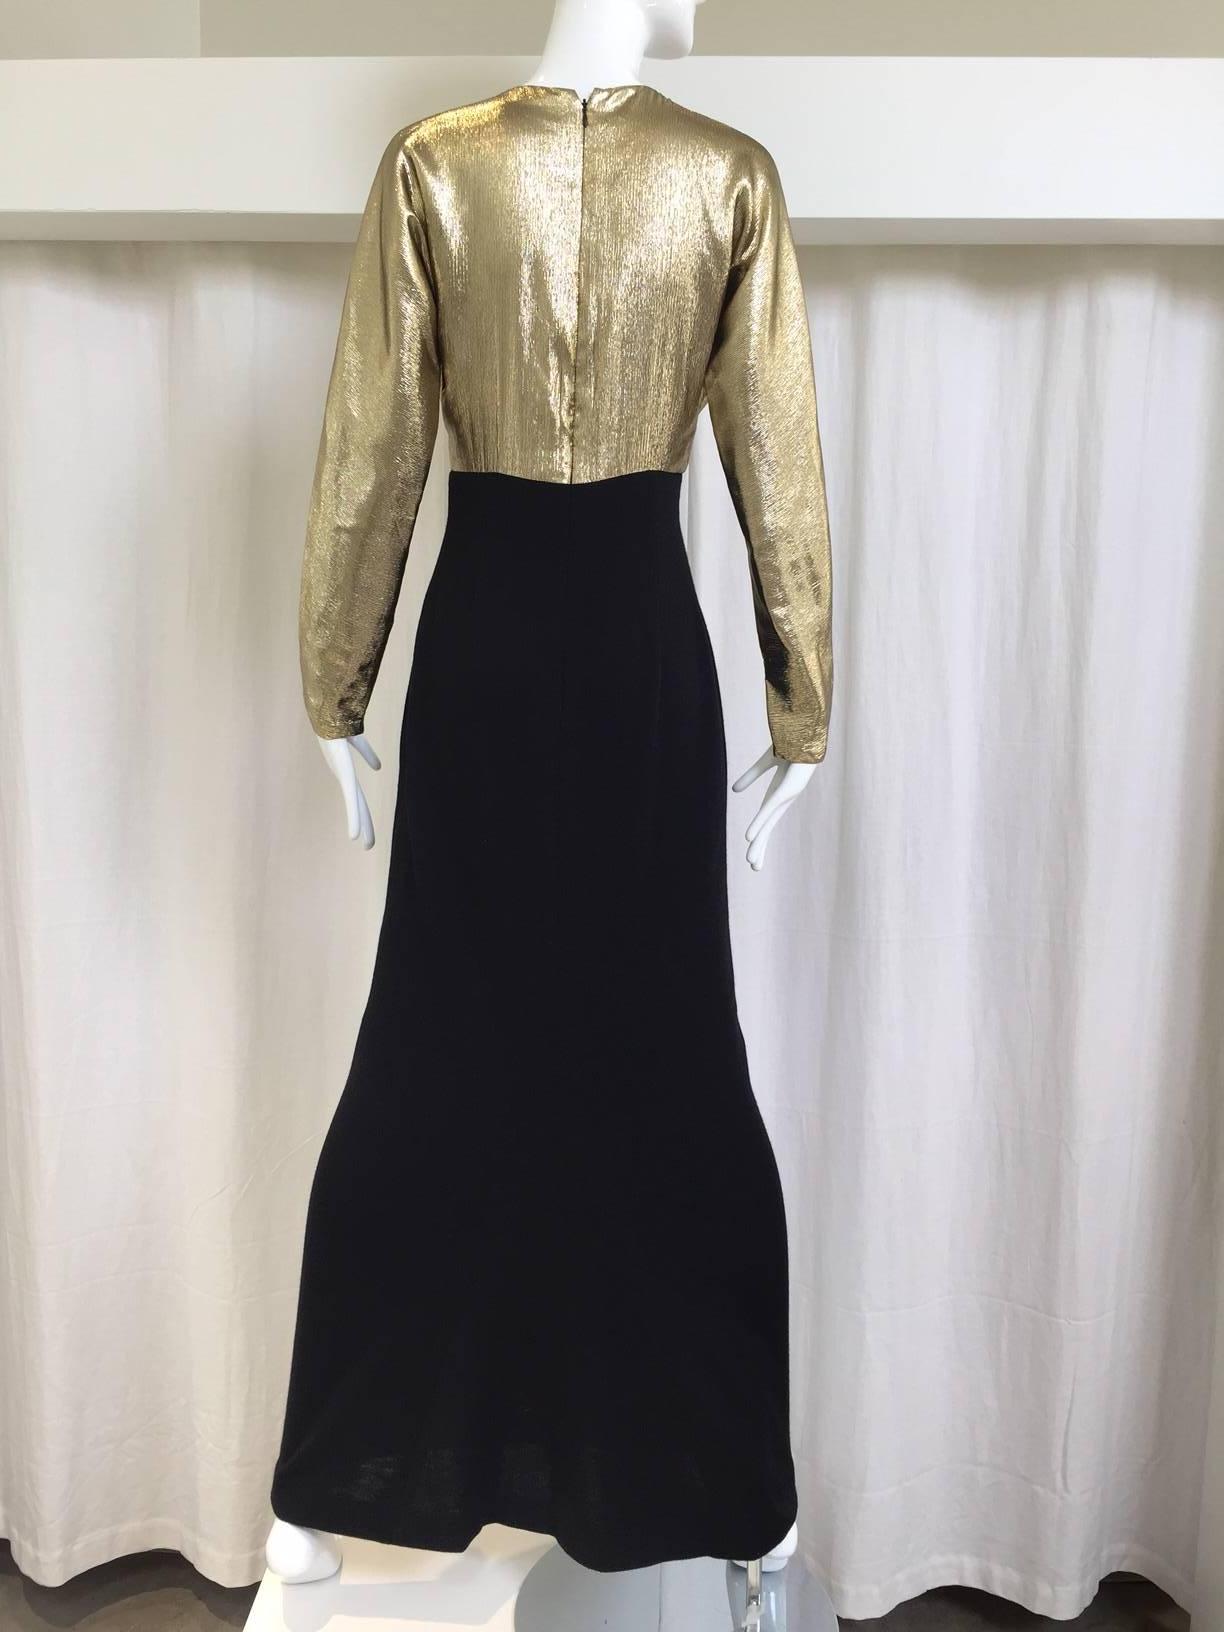 Vintage 1980s Elegant Geoffrey Beene gold lamé and wool jersey gown with long sleeve. Medium size
Measurement: 
Bust: 36